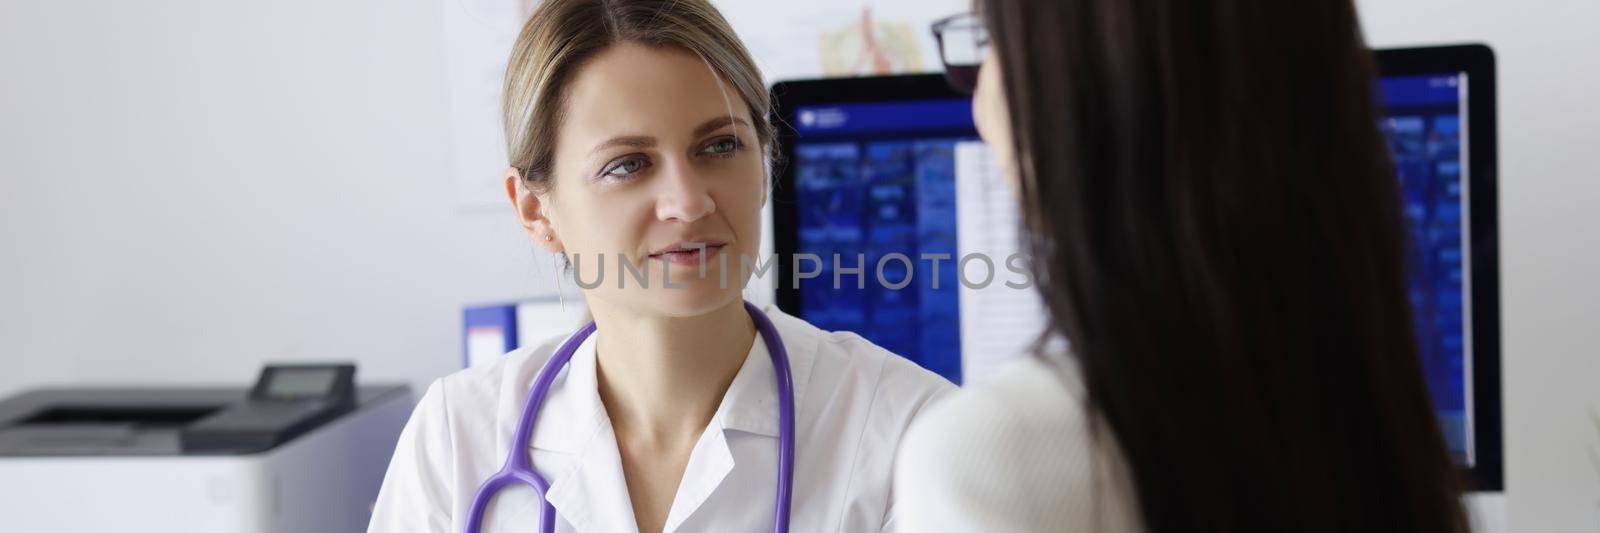 Patient on appointment explain problem to medical worker in clinic by kuprevich